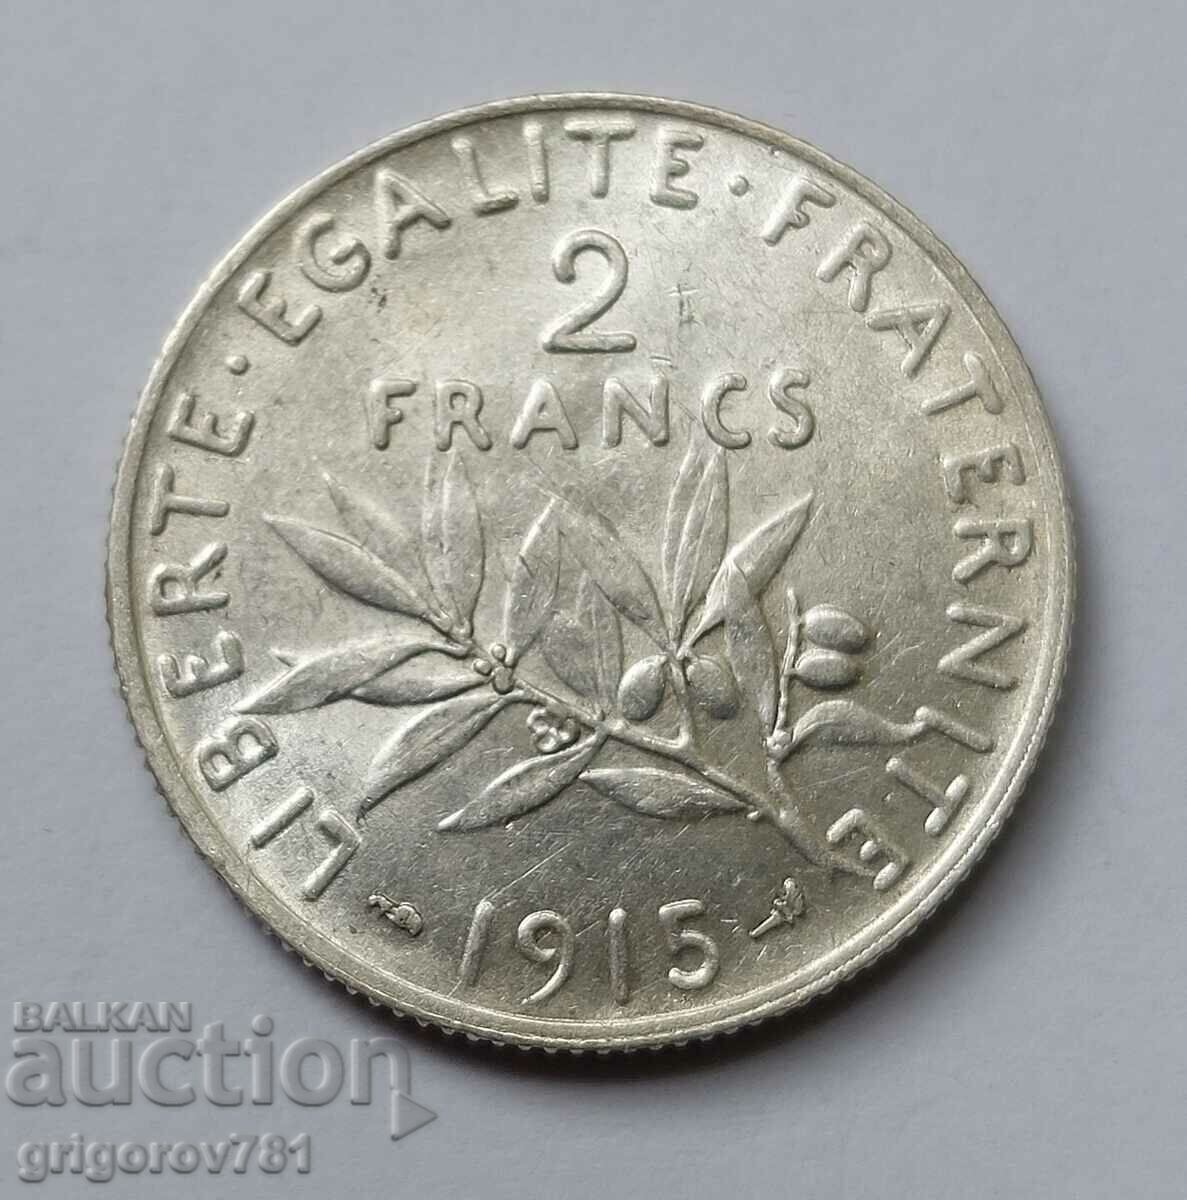 2 Francs Silver France 1915 - Silver Coin #78